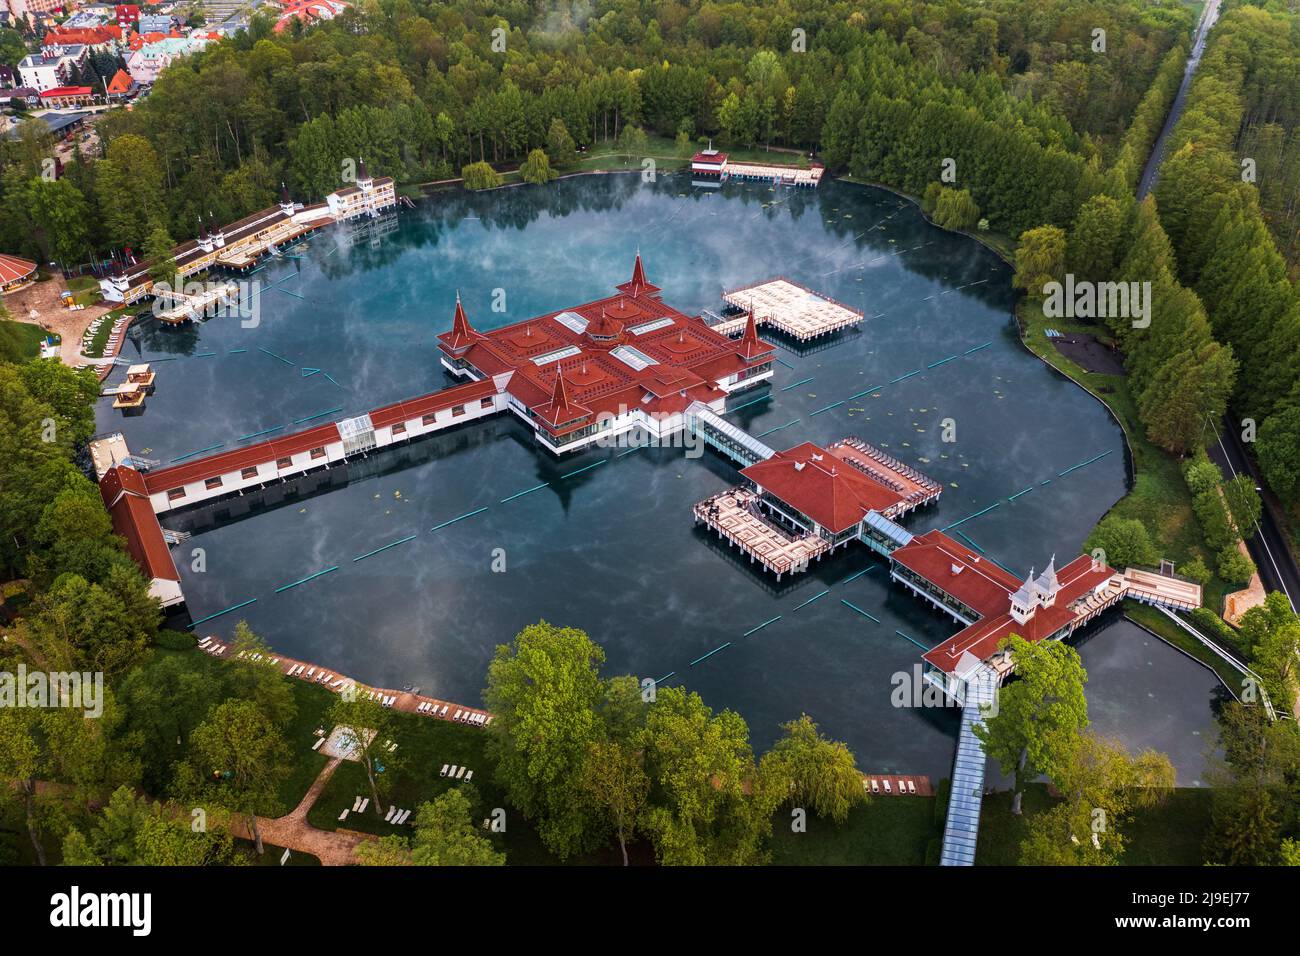 Heviz, Hungary - Aerial view of Lake Heviz, the world’s second-largest thermal lake and holiday spa destination at Zala county on a summer morning wit Stock Photo